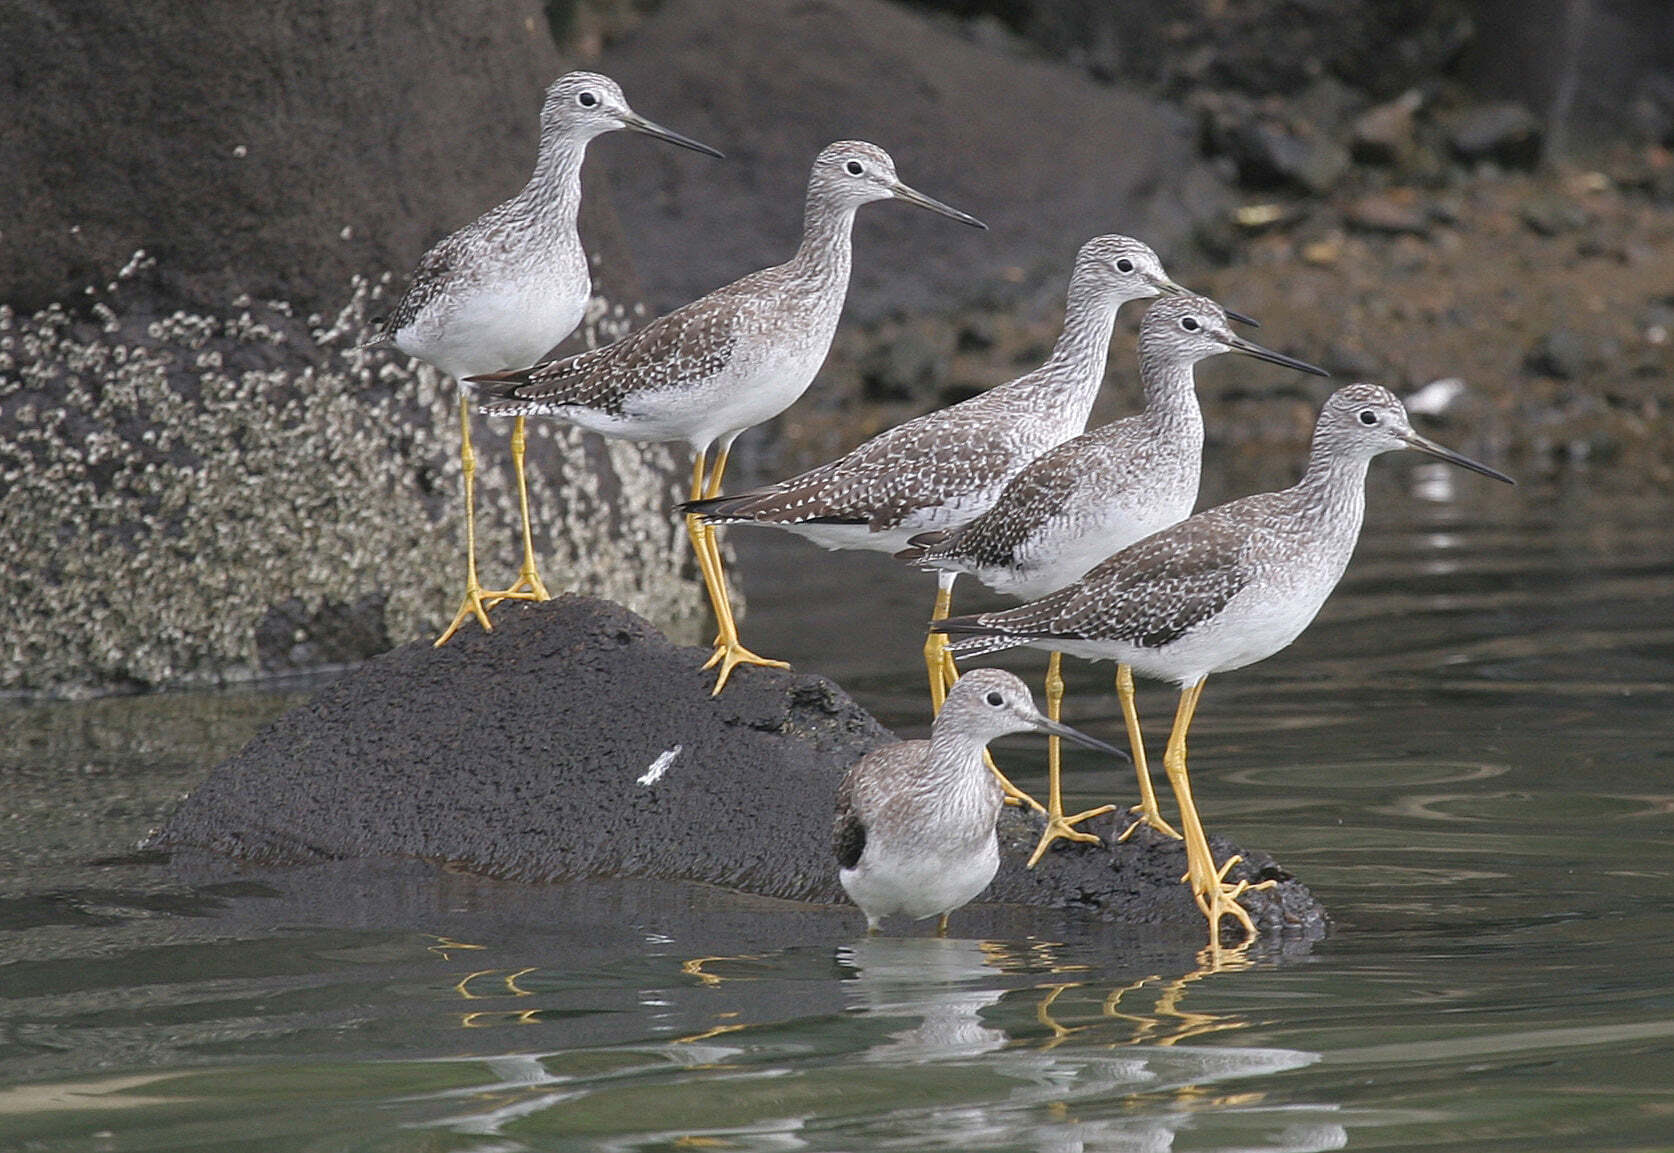 A gathering of Greater Yellowlegs. Photo: <a href="https://www.facebook.com/don.riepe.14" target="_blank">Don Riepe</a>